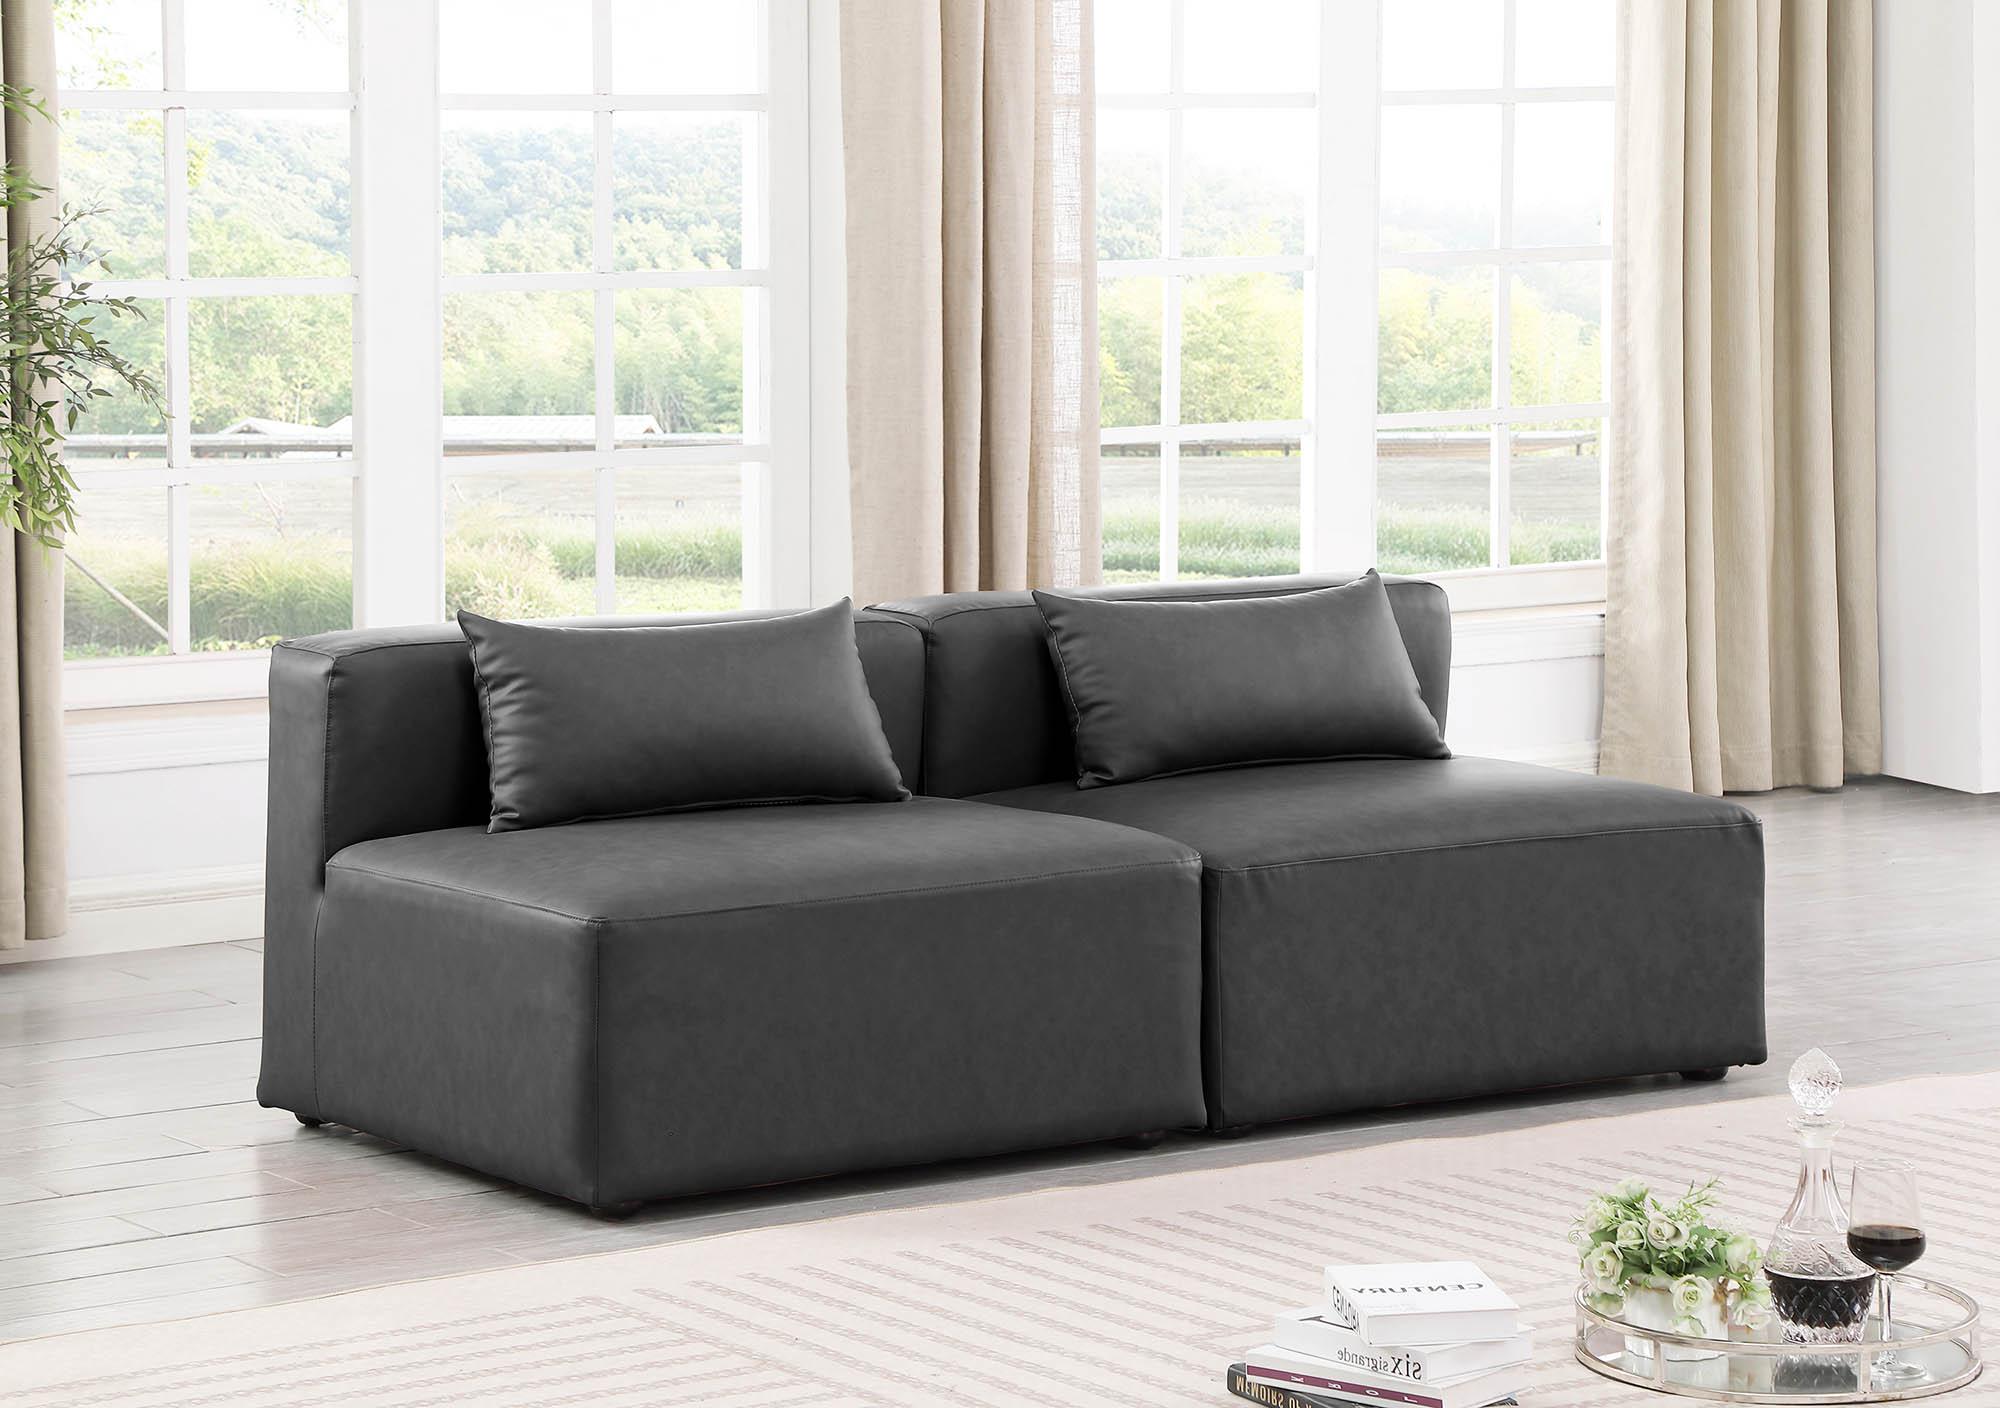 

    
Charcoal Grey Faux Leather Modular Sofa CUBE 668Grey-S72A Meridian Contemporary
